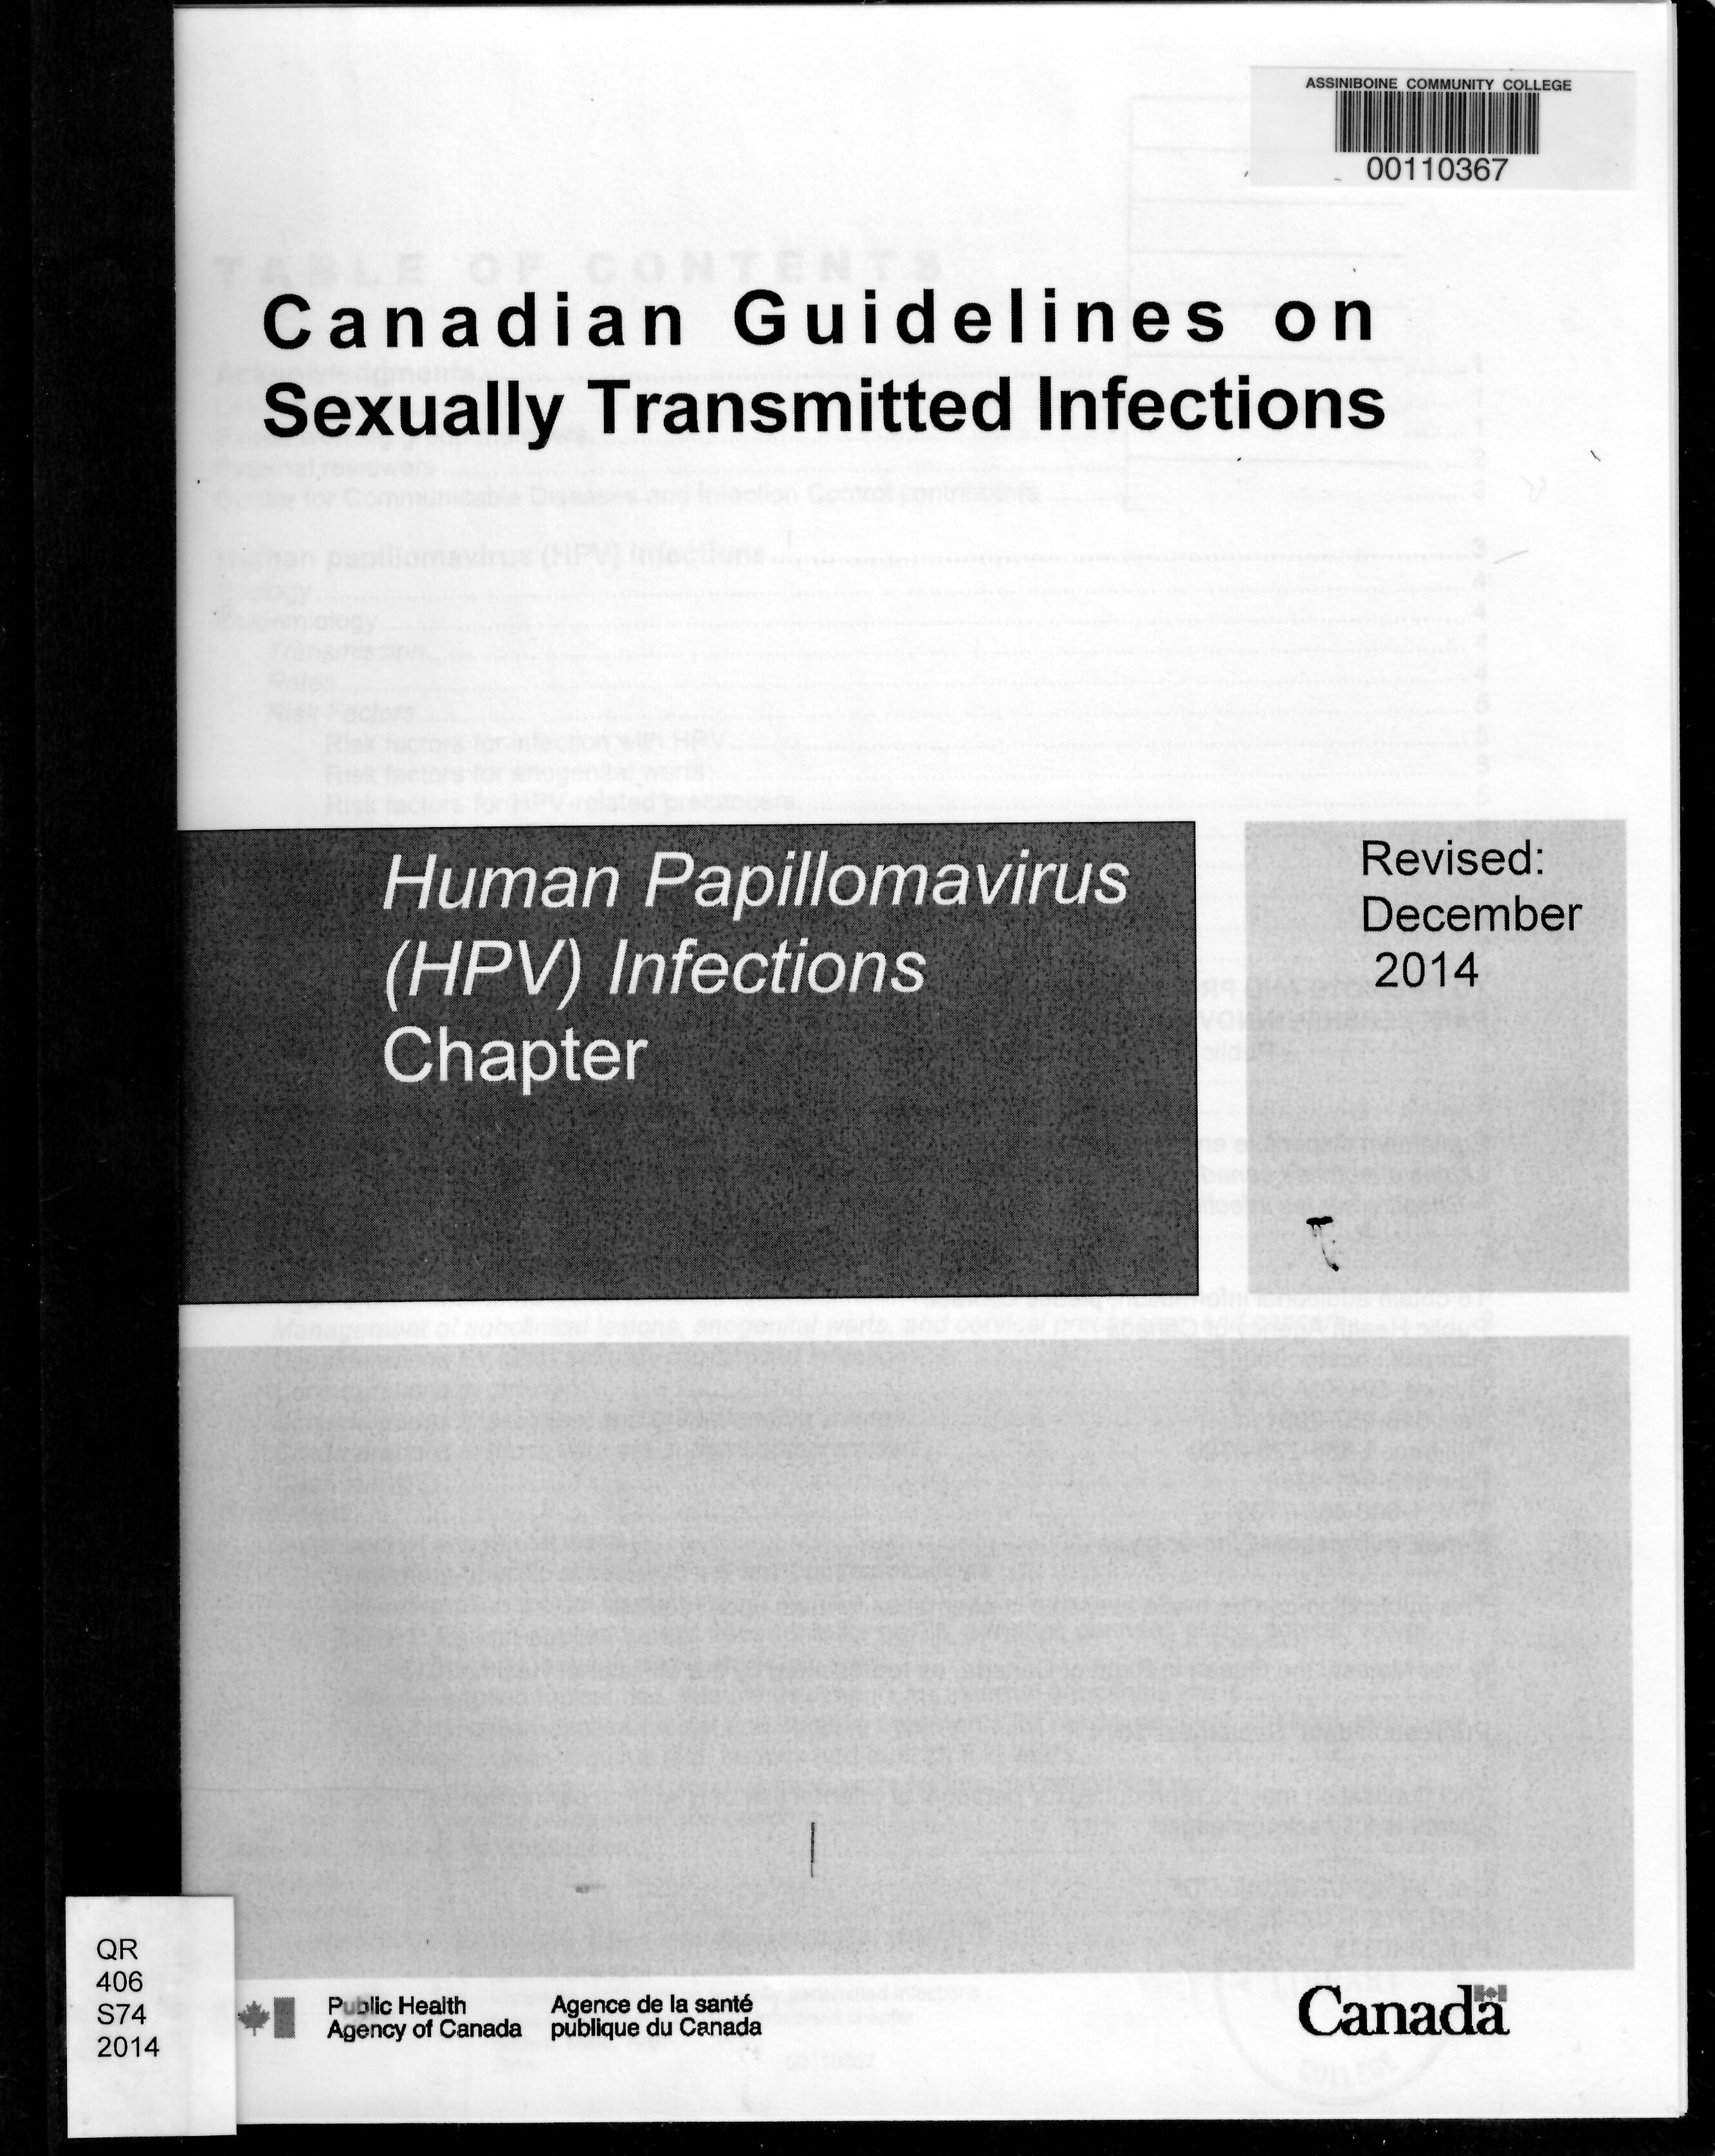 Canadian guidelines on sexually transmitted infections : human papillomavirus (HPV) infections chapter